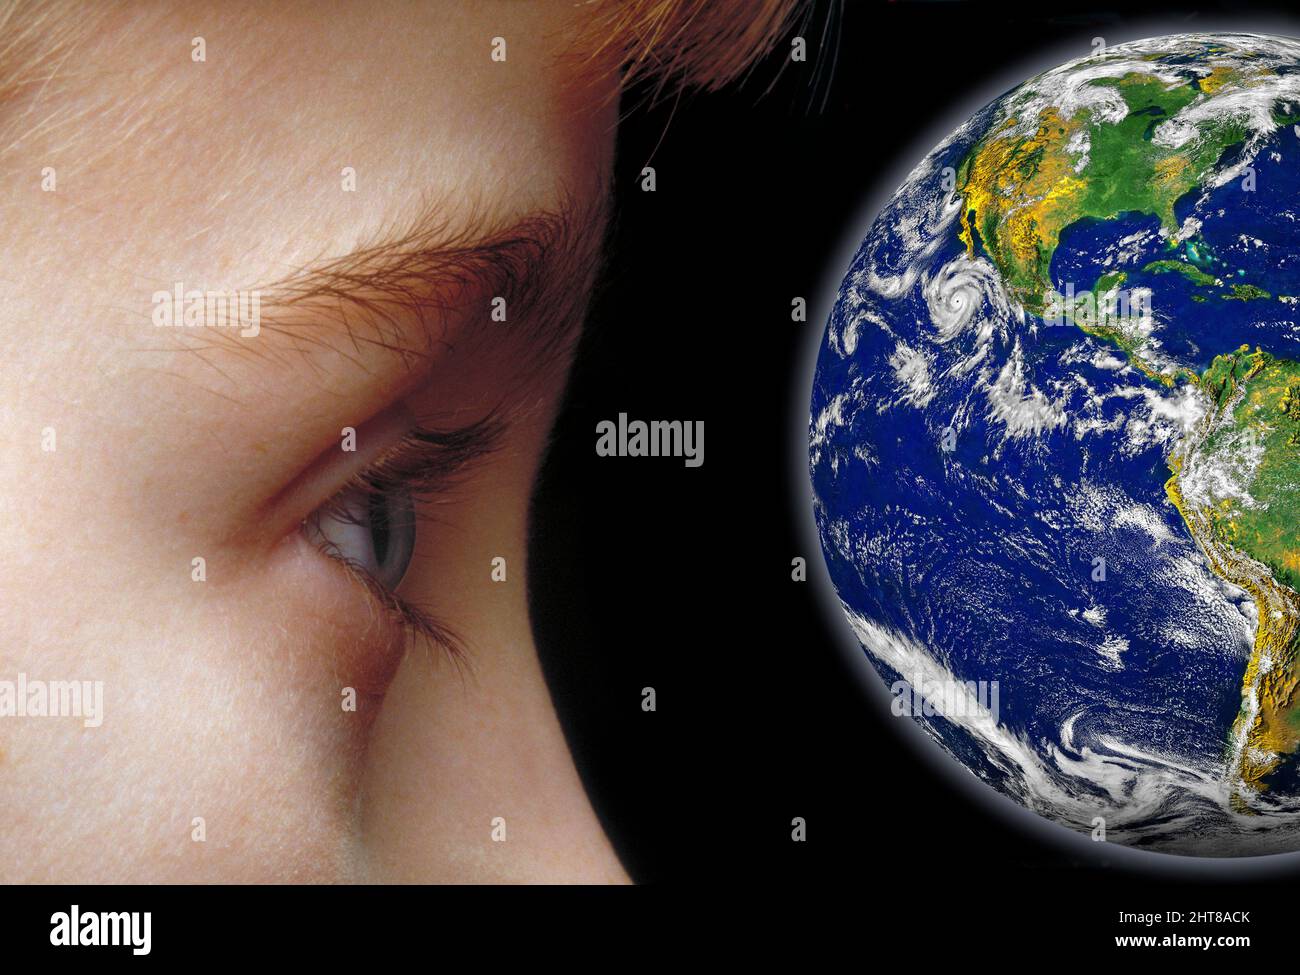 Awareness of planet Earth. Stock Photo